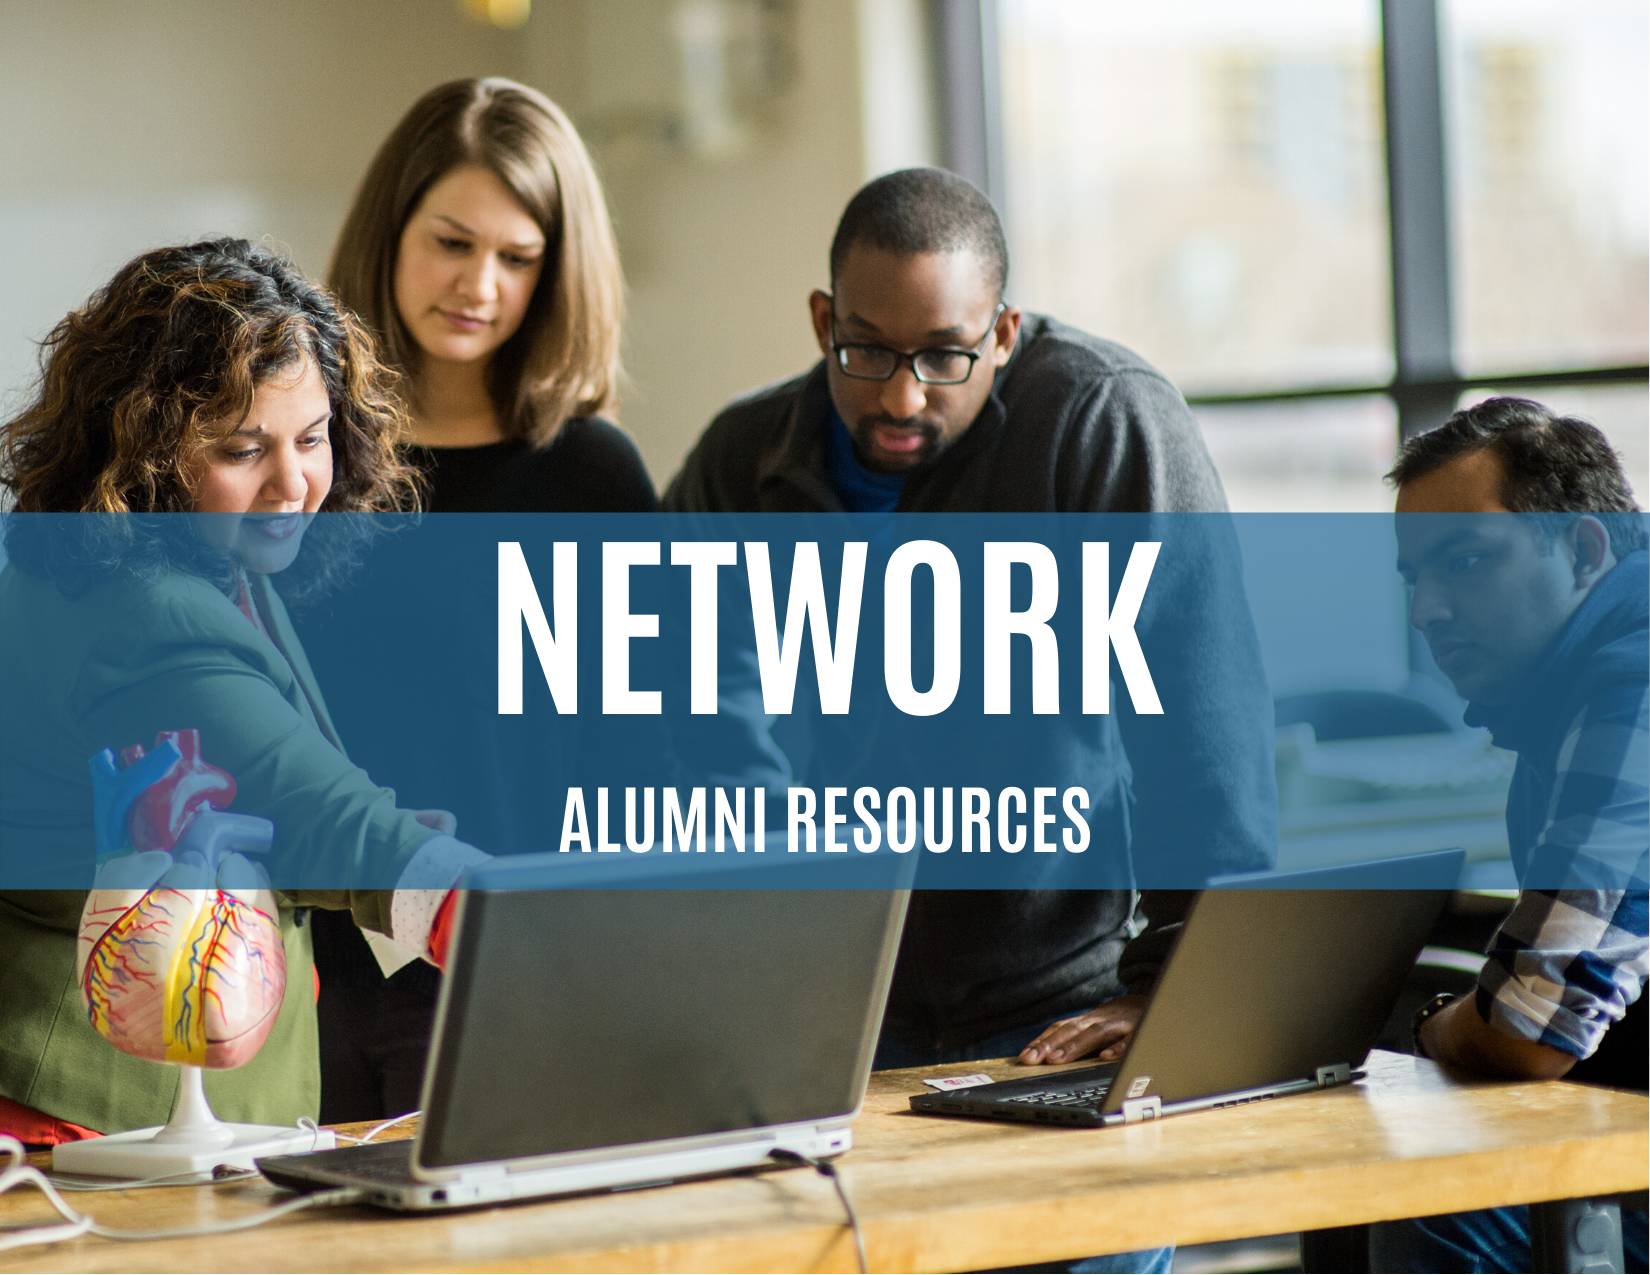 Network with alumni resources